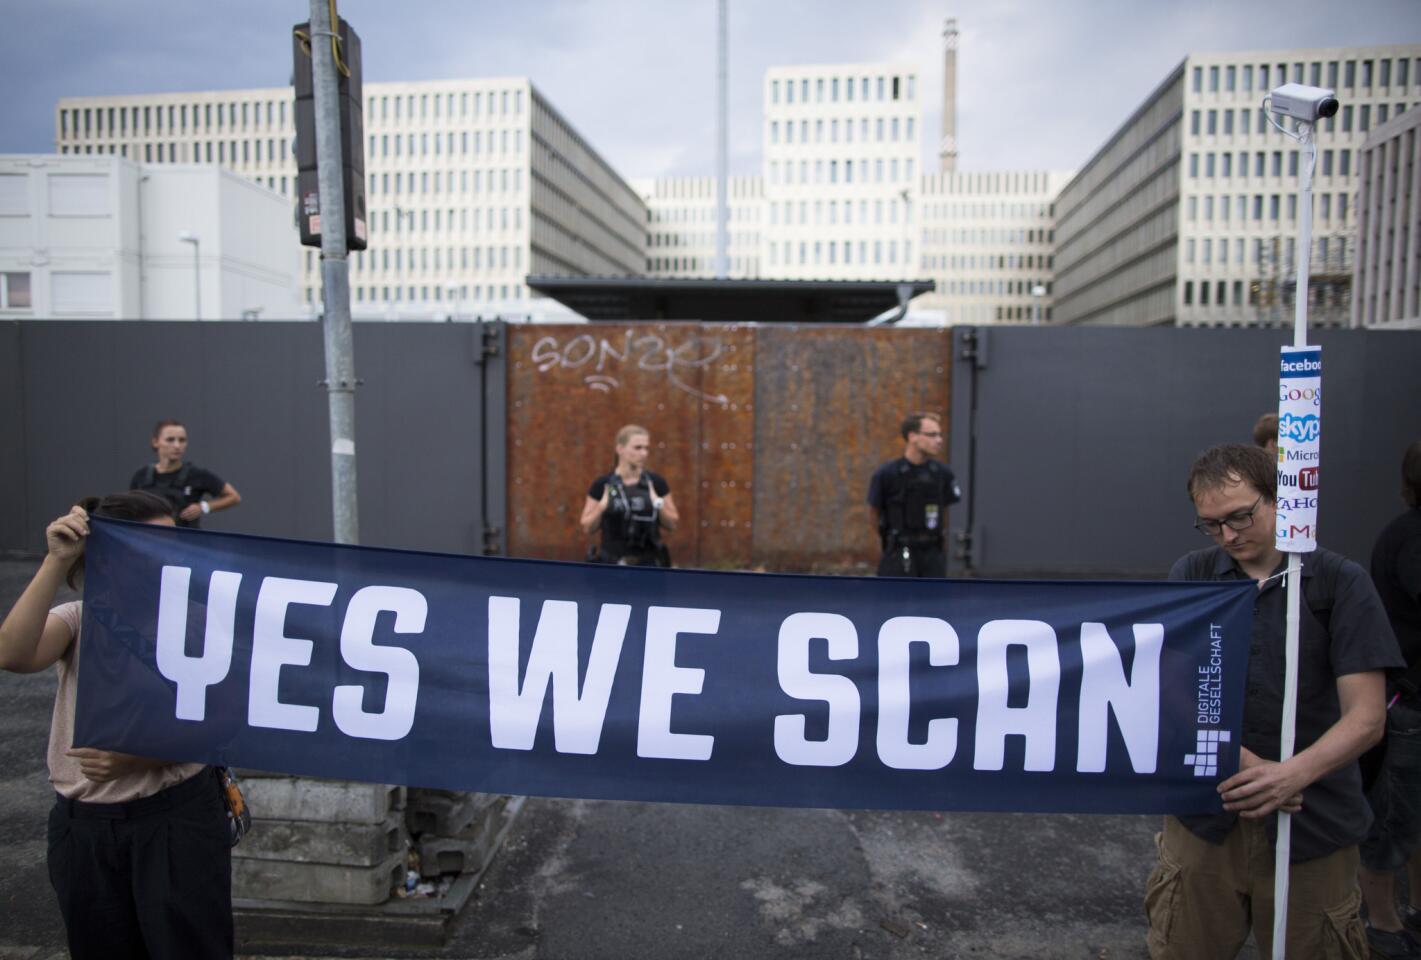 'Yes We Scan'